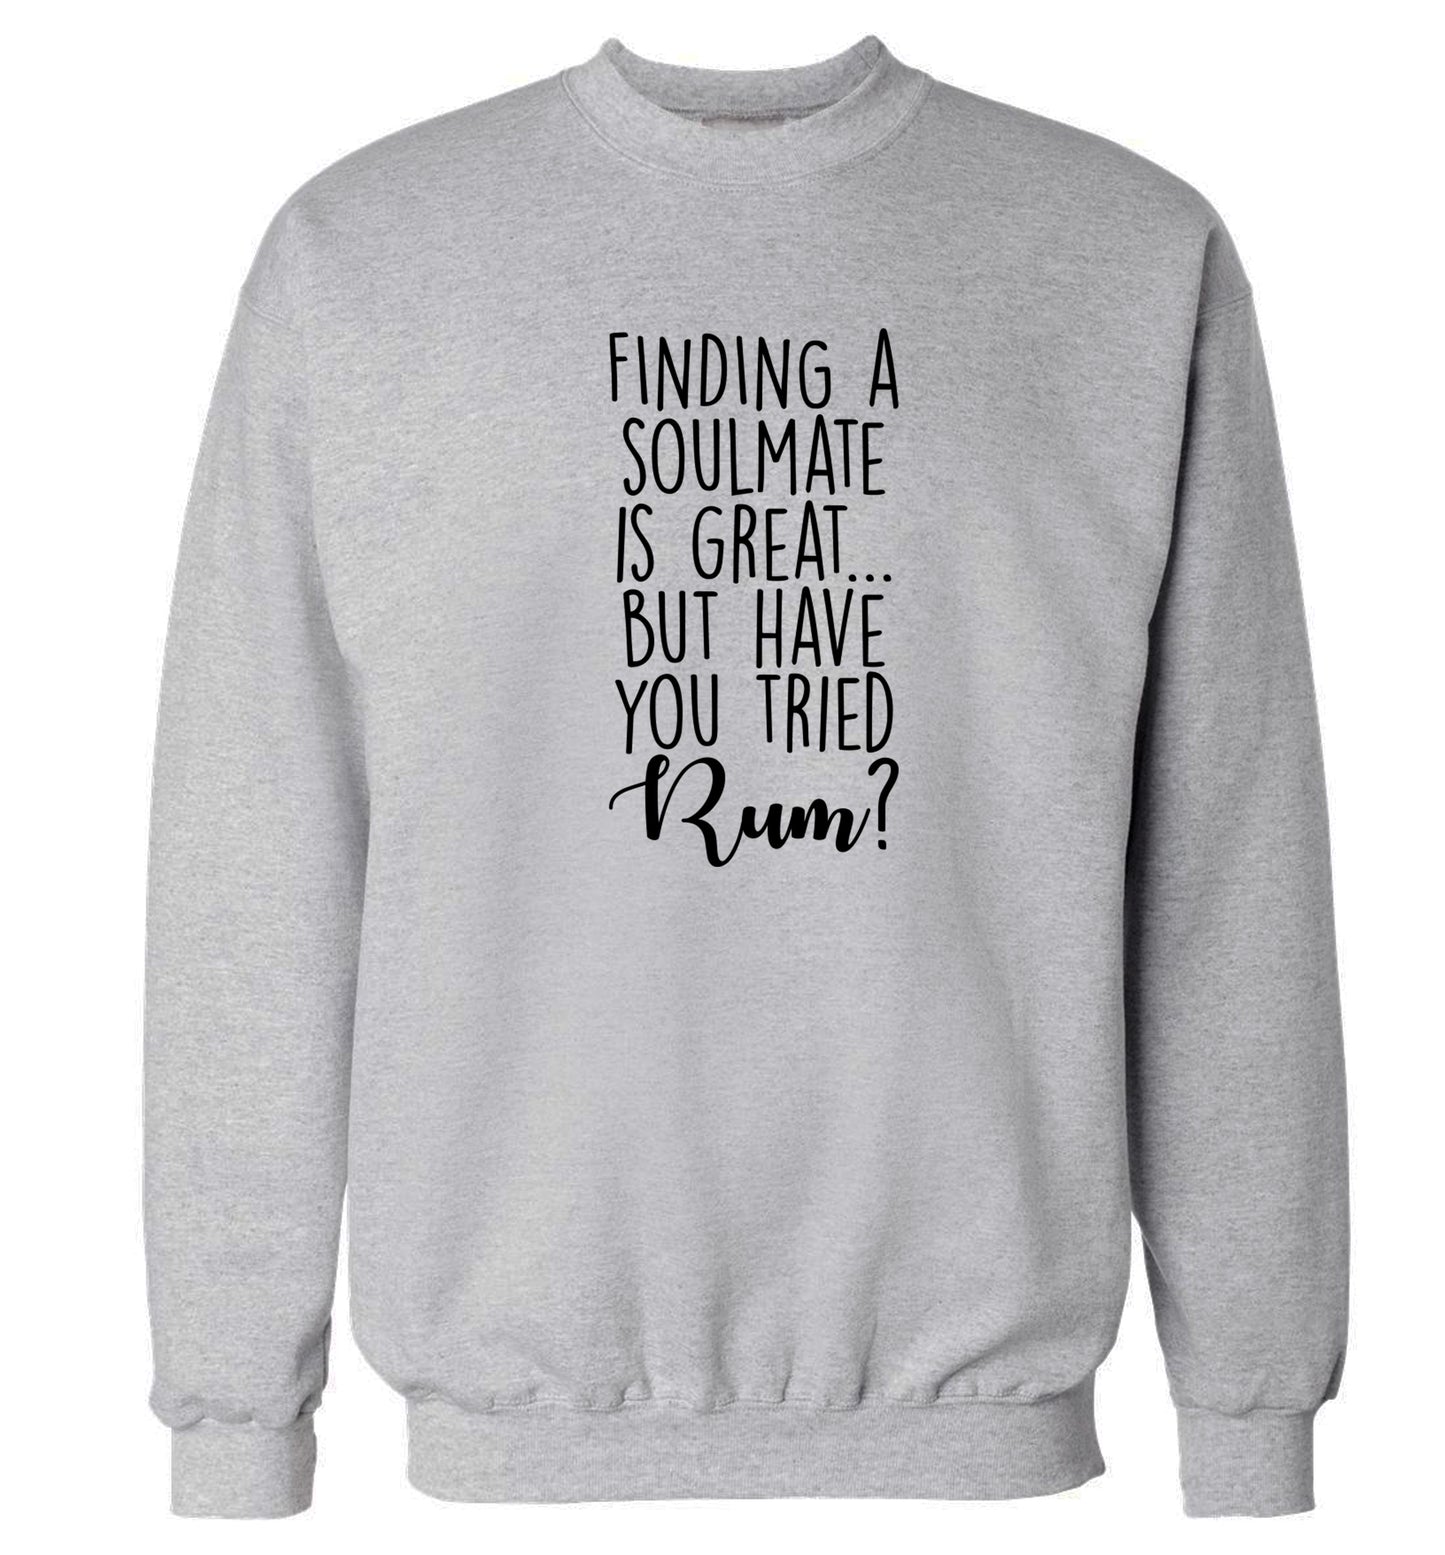 Finding a soulmate is great but have you tried rum? Adult's unisex grey Sweater 2XL